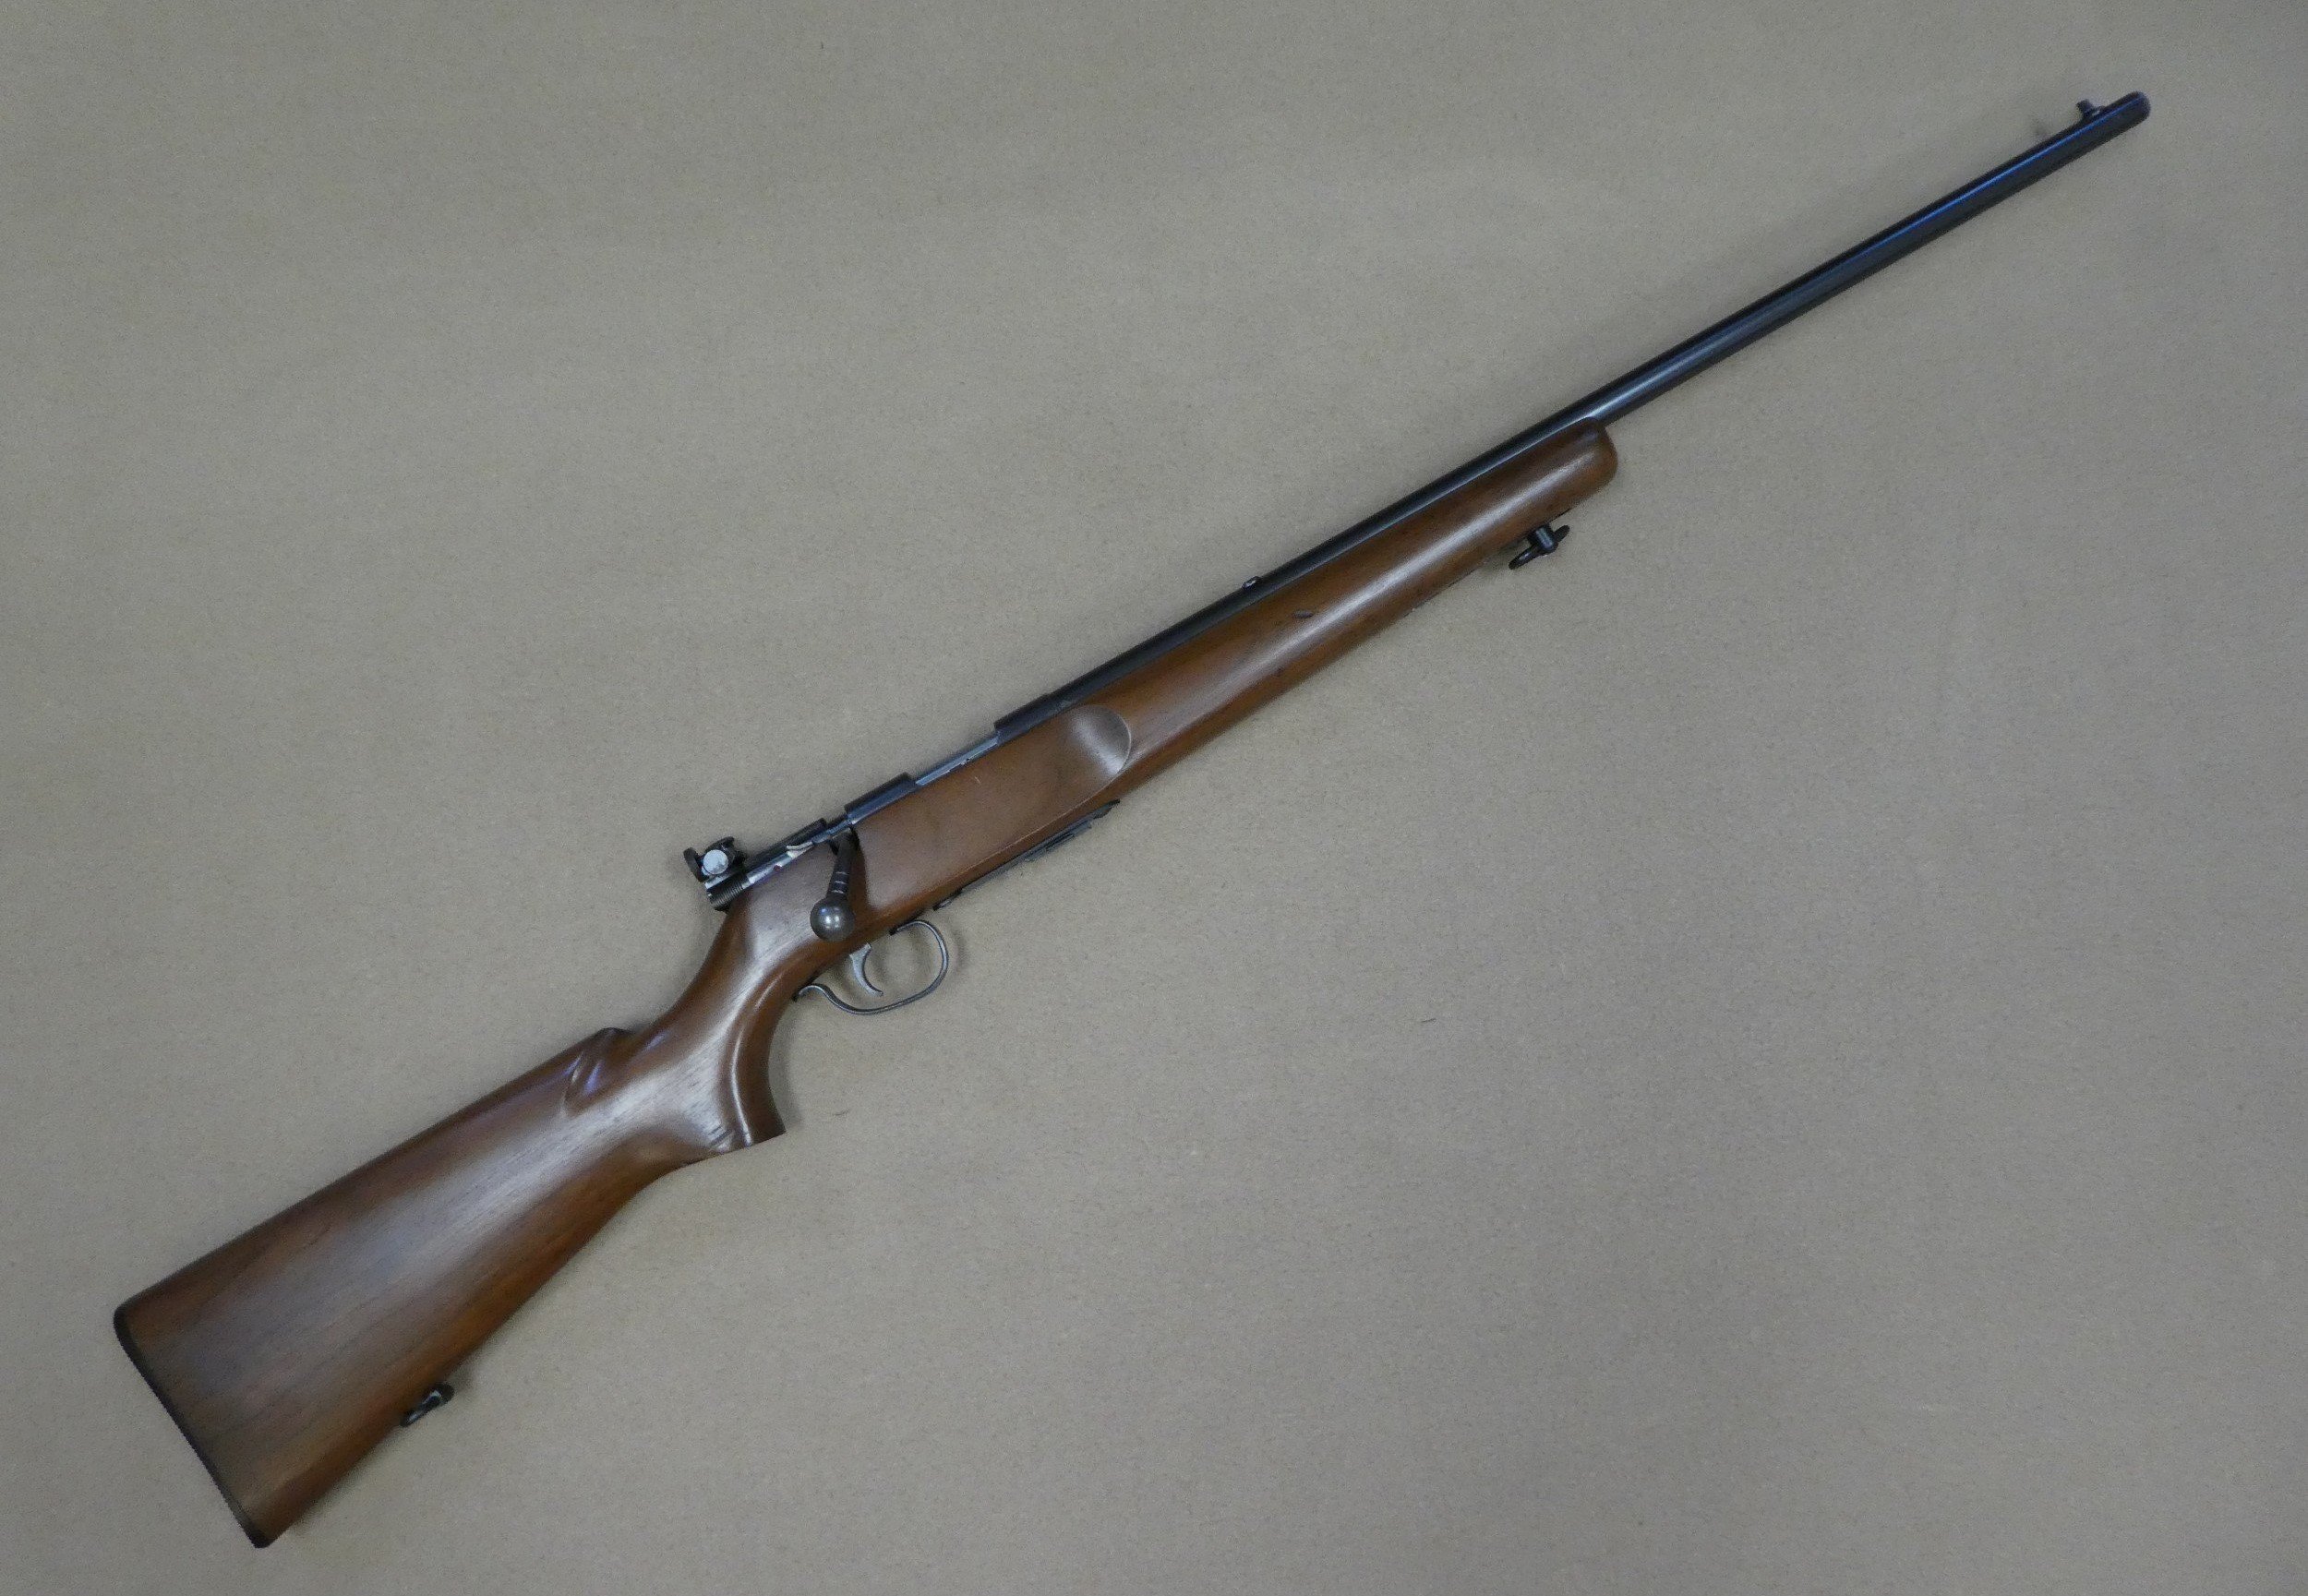 Remington 521, chambered for .22 LR 